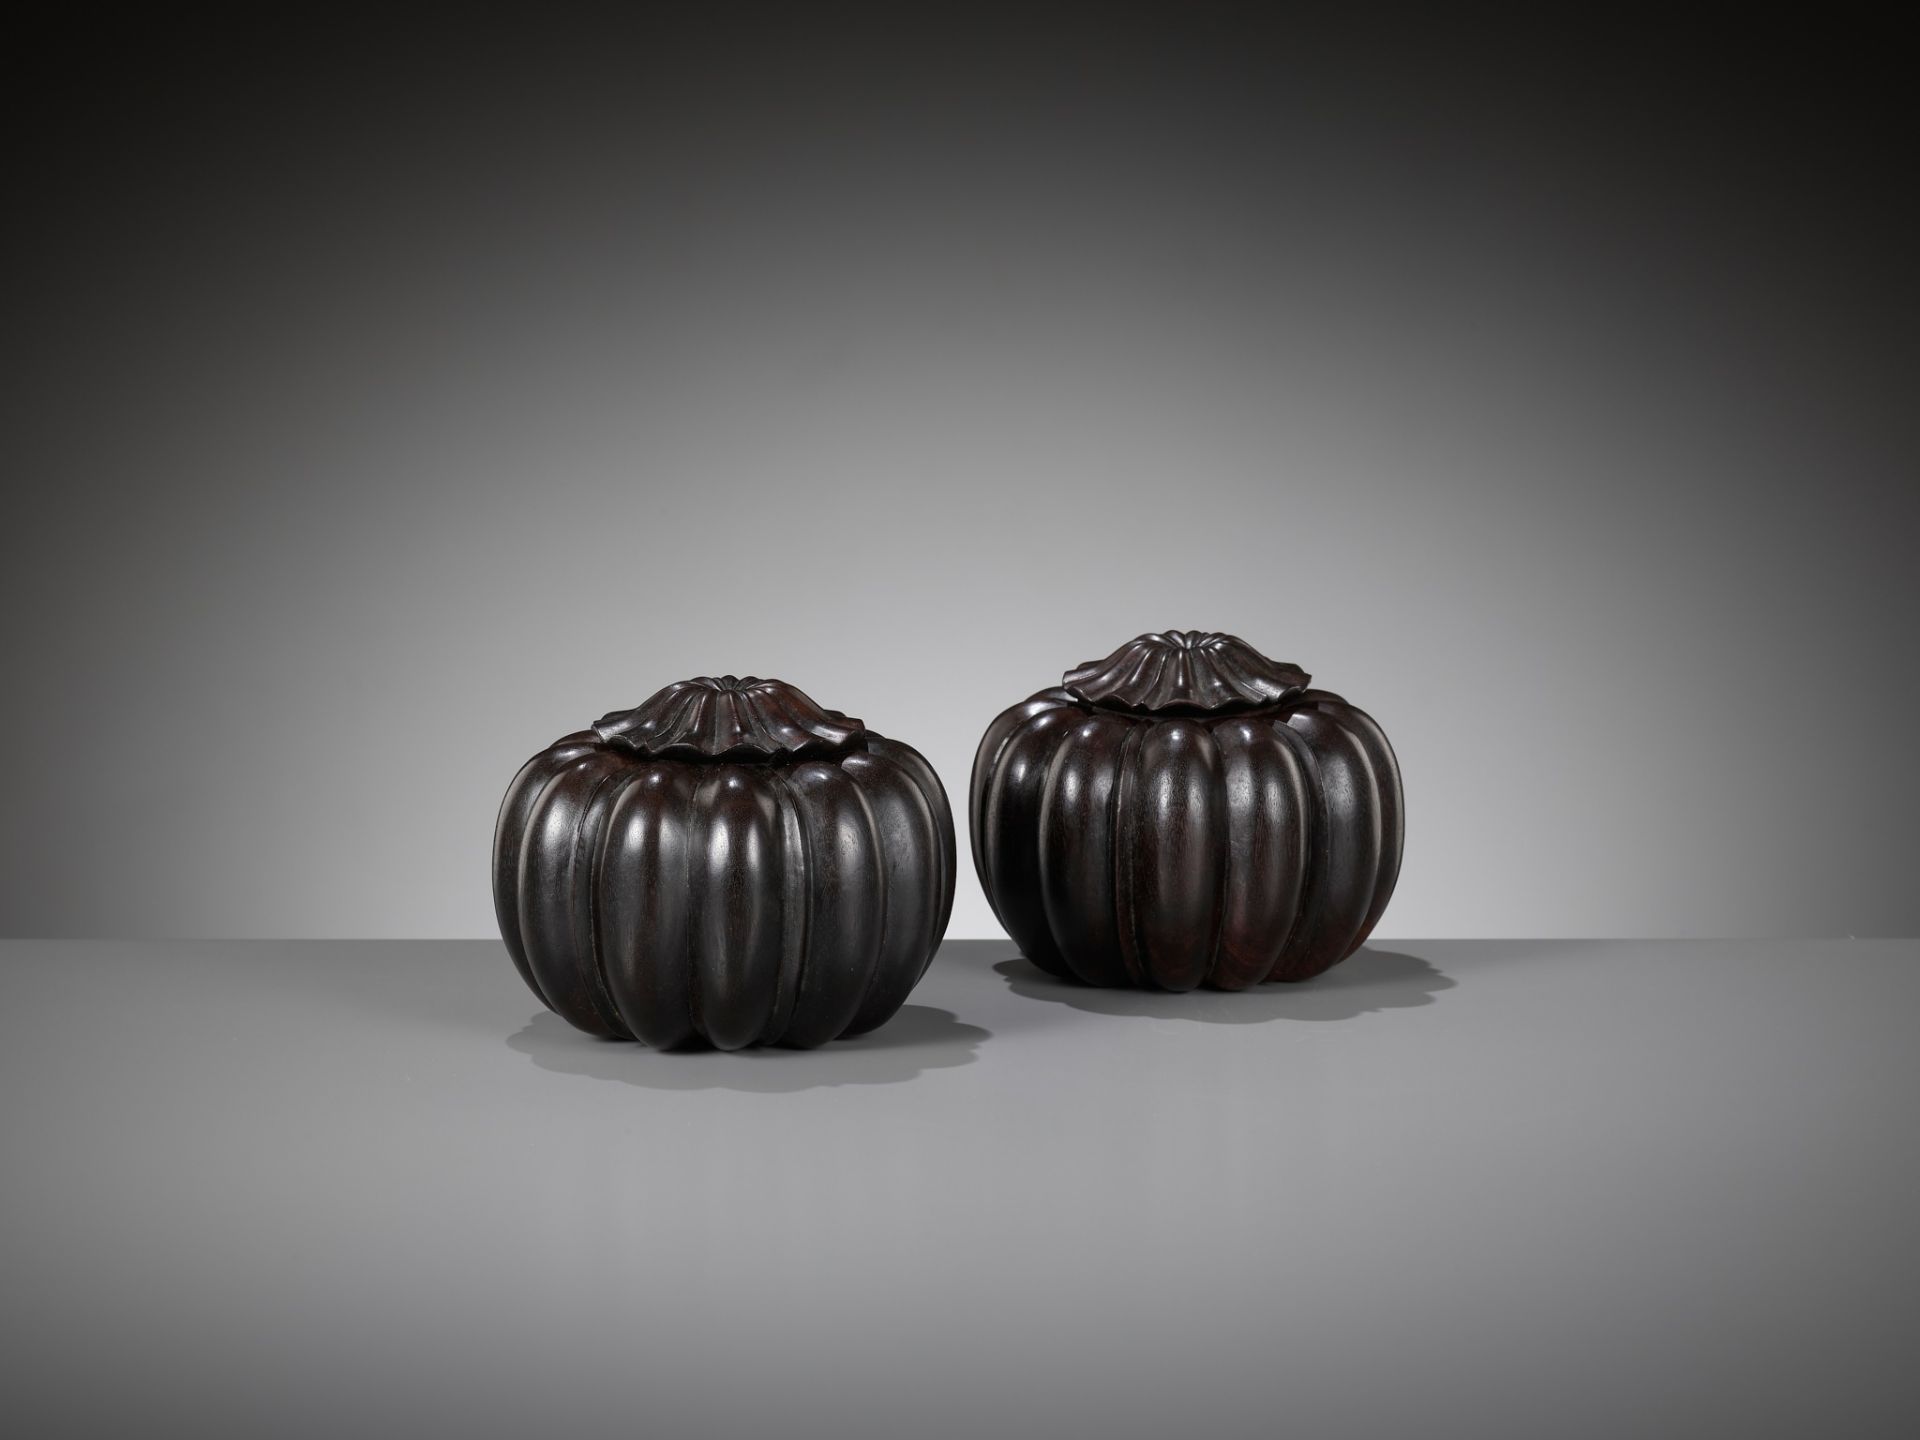 A PAIR OF ZITAN WEIQI COUNTER CONTAINERS, WEIQIZIHE, 17TH-18TH CENTURY - Image 6 of 10